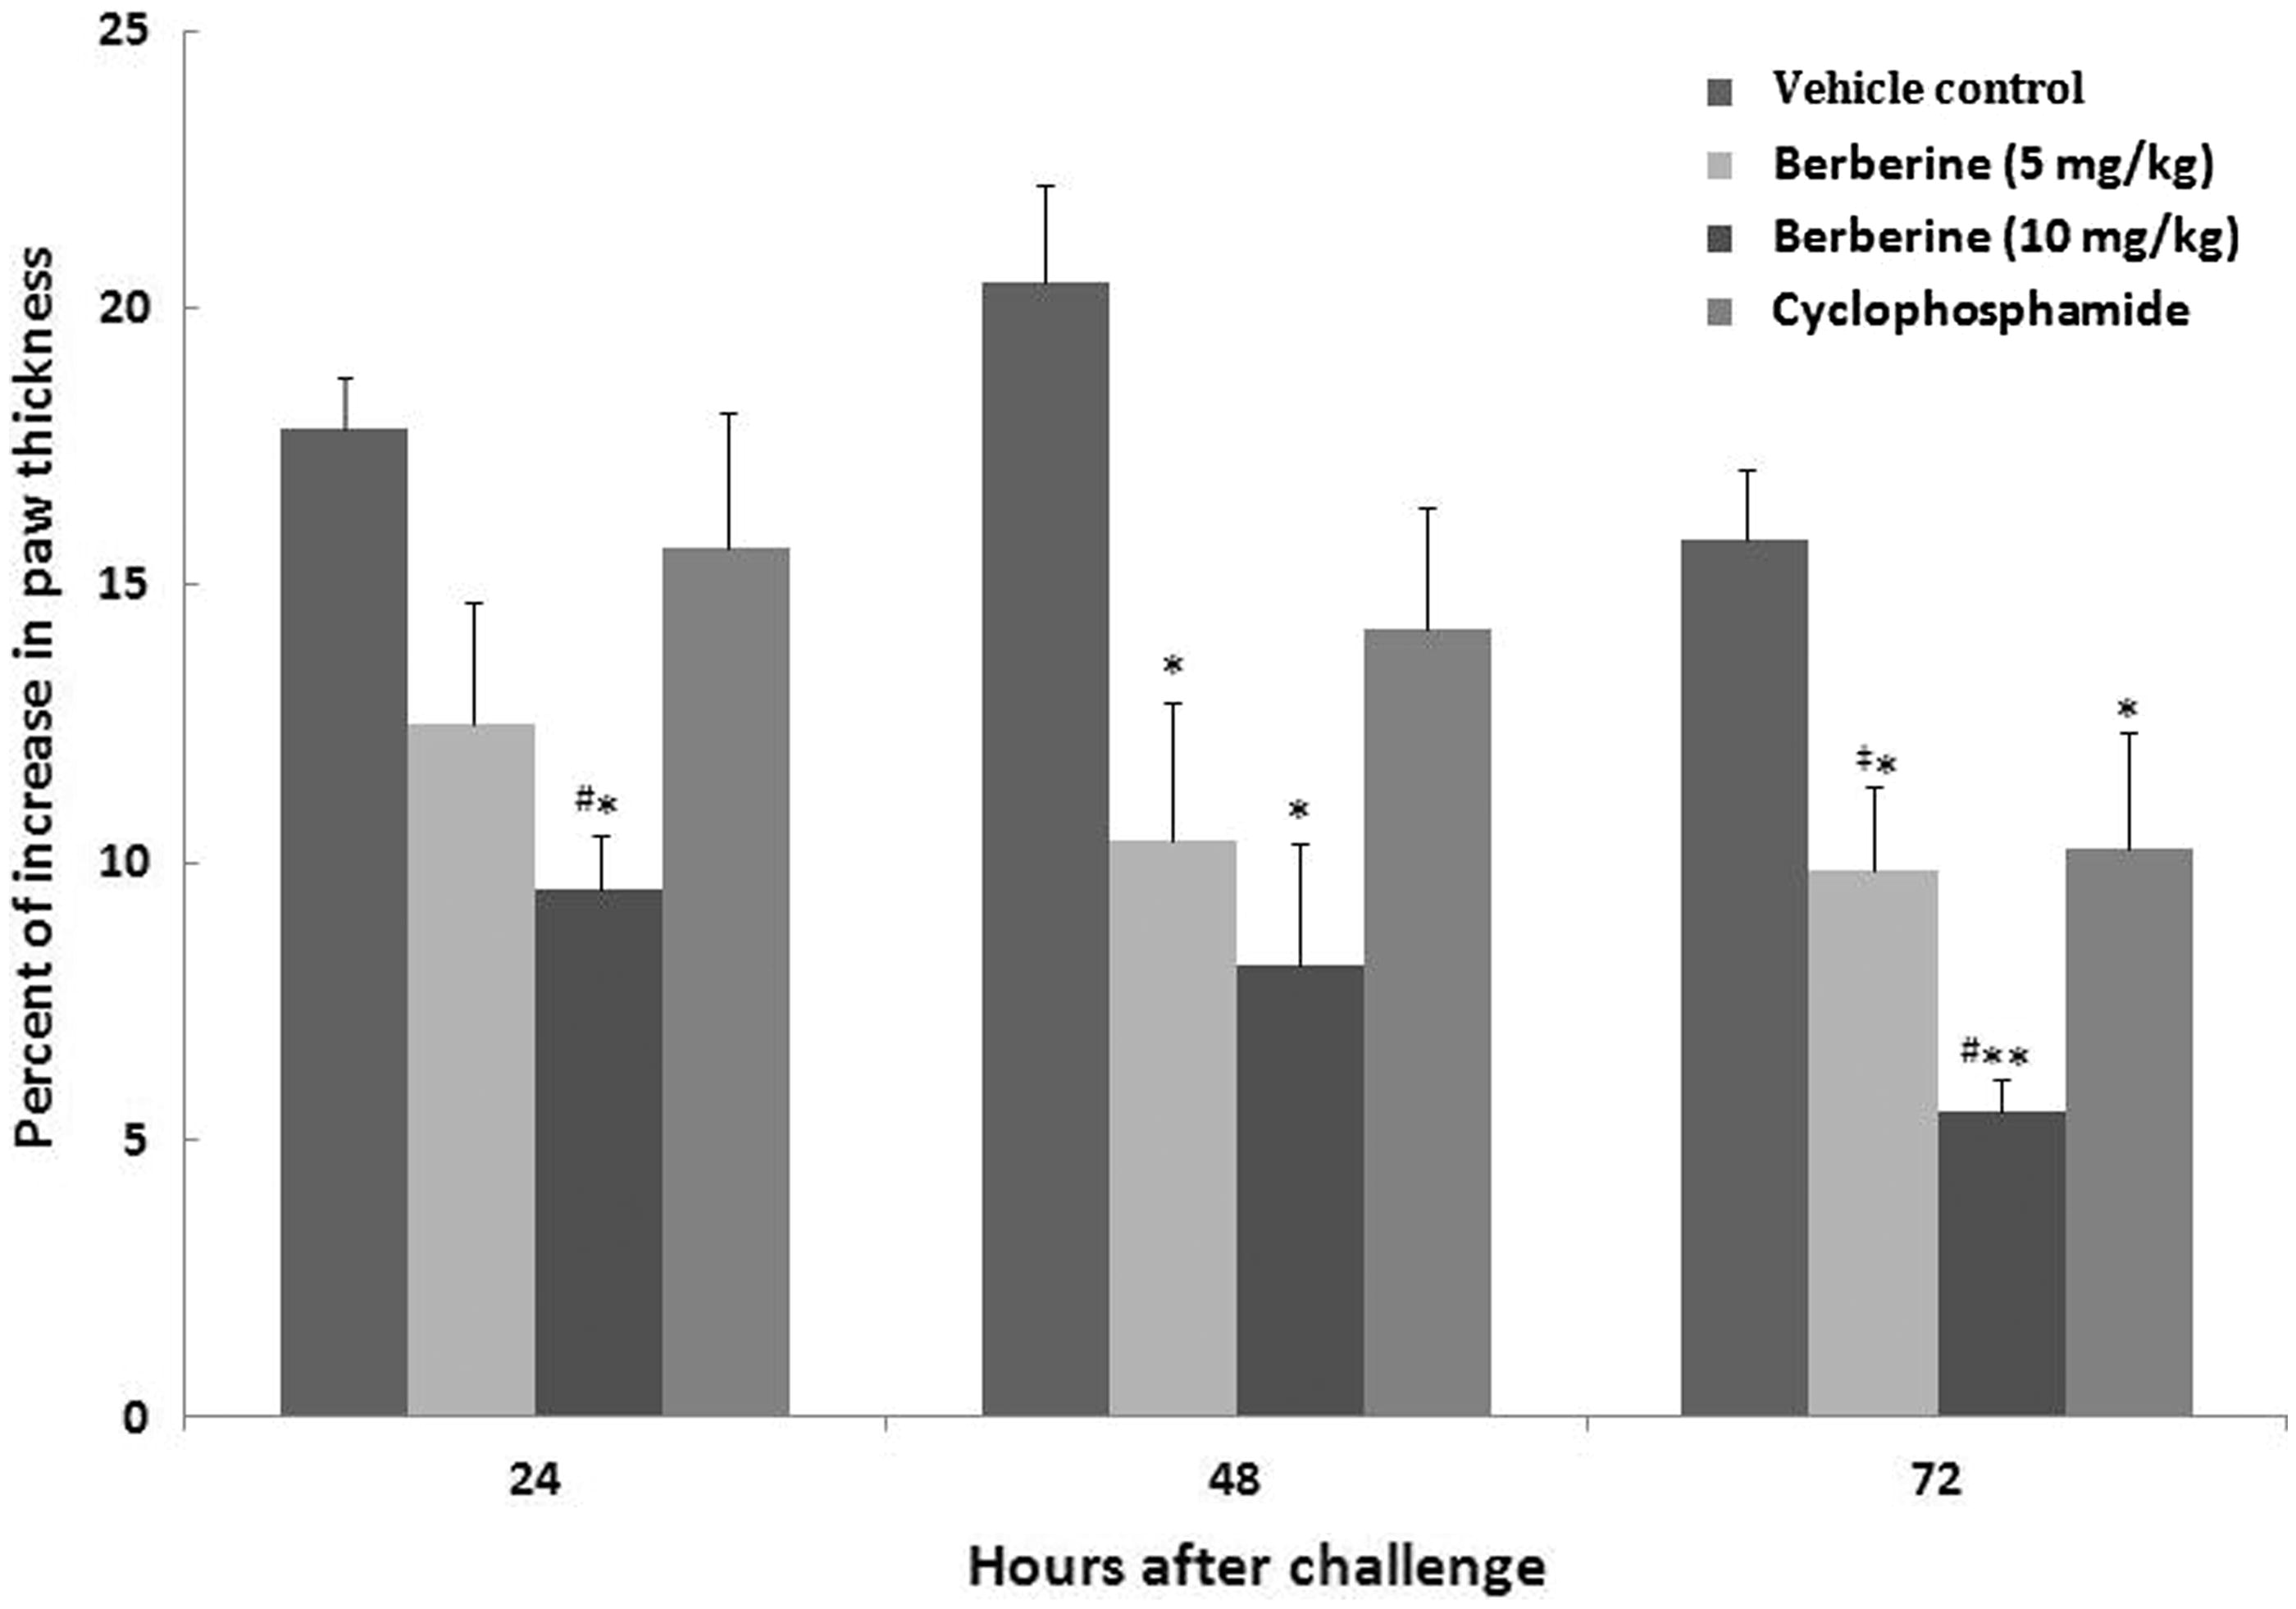 Figure 4. Effects of subacute berberine (BBR, 14 days) exposure on mice DTH response. The percentage increase in paw thickness of mice 24, 48 and 72 h after footpad SRBC challenge in indicated regimens. Values shown are mean ± SE (n = 6/group). Value significantly different from vehicle control mice at *p < 0.05 or **p < 0.01; #significantly different versus positive control (CYP) (p < 0.05); or ‡significantly different as a function of BBR dose (p < 0.05).